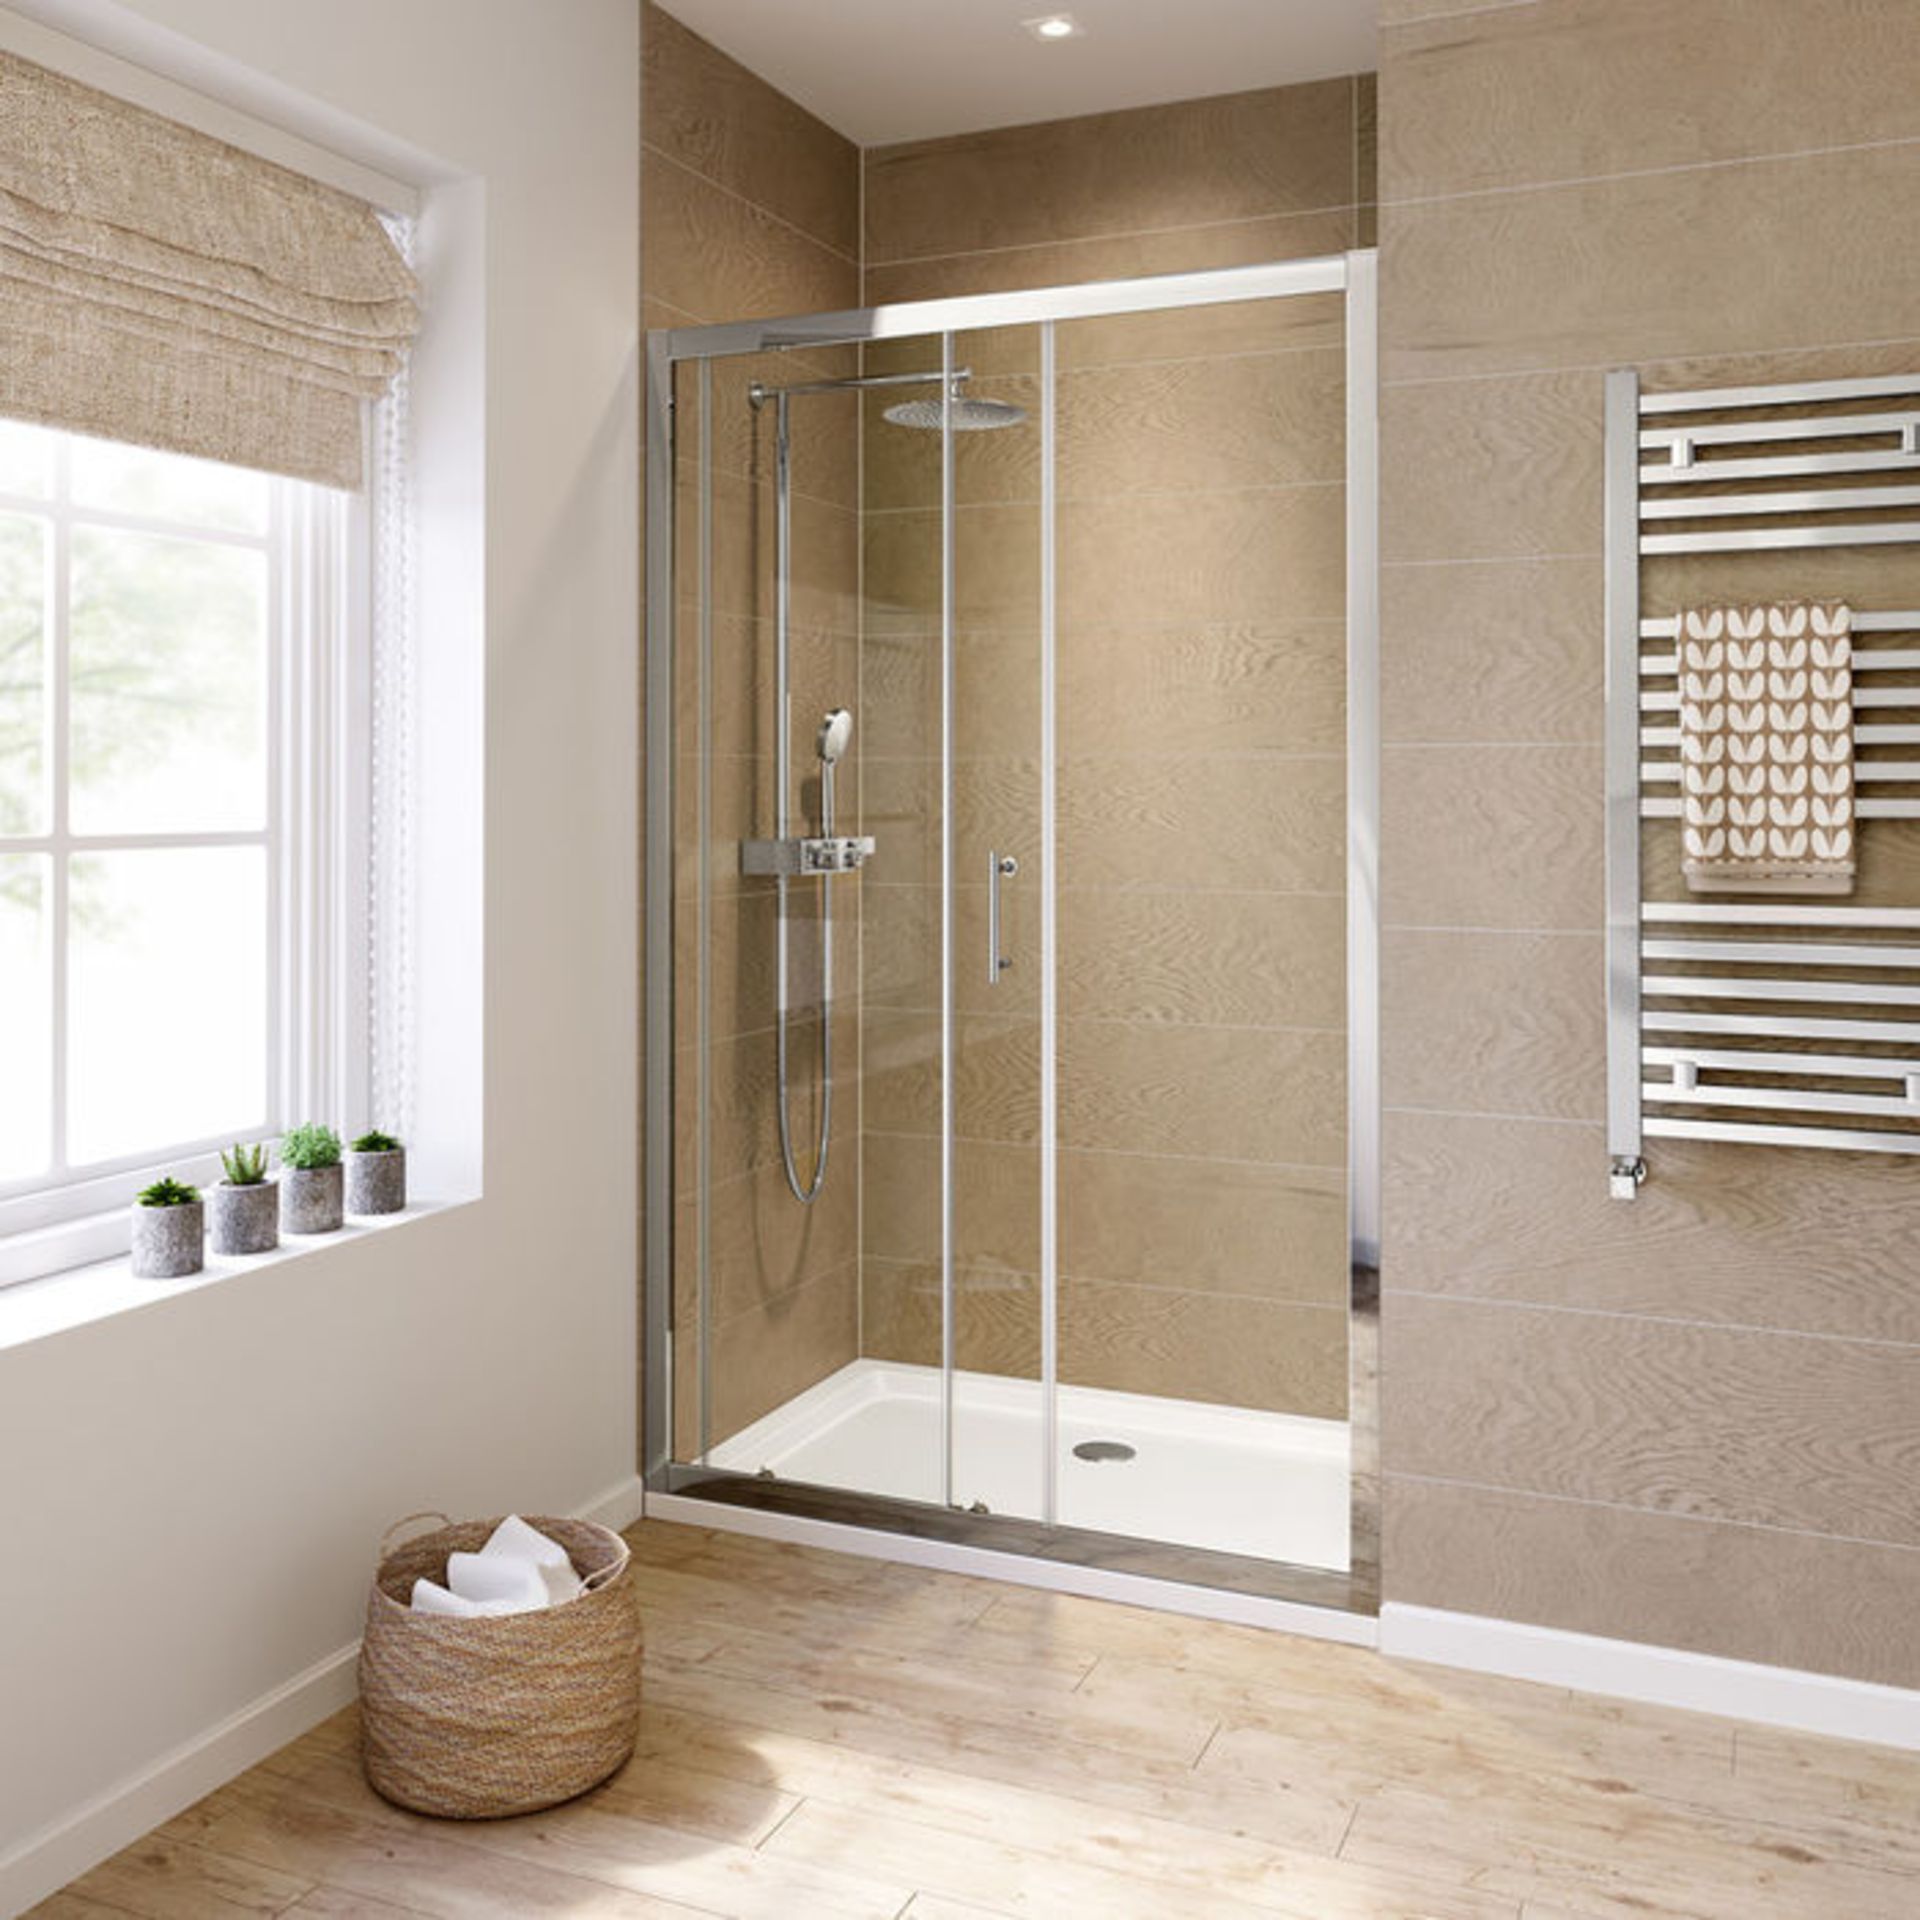 (PT20) 1200mm - 6mm - Elements Sliding Shower Door. RRP £299.99. 6mm Safety Glass Fully waterproof - Image 2 of 5